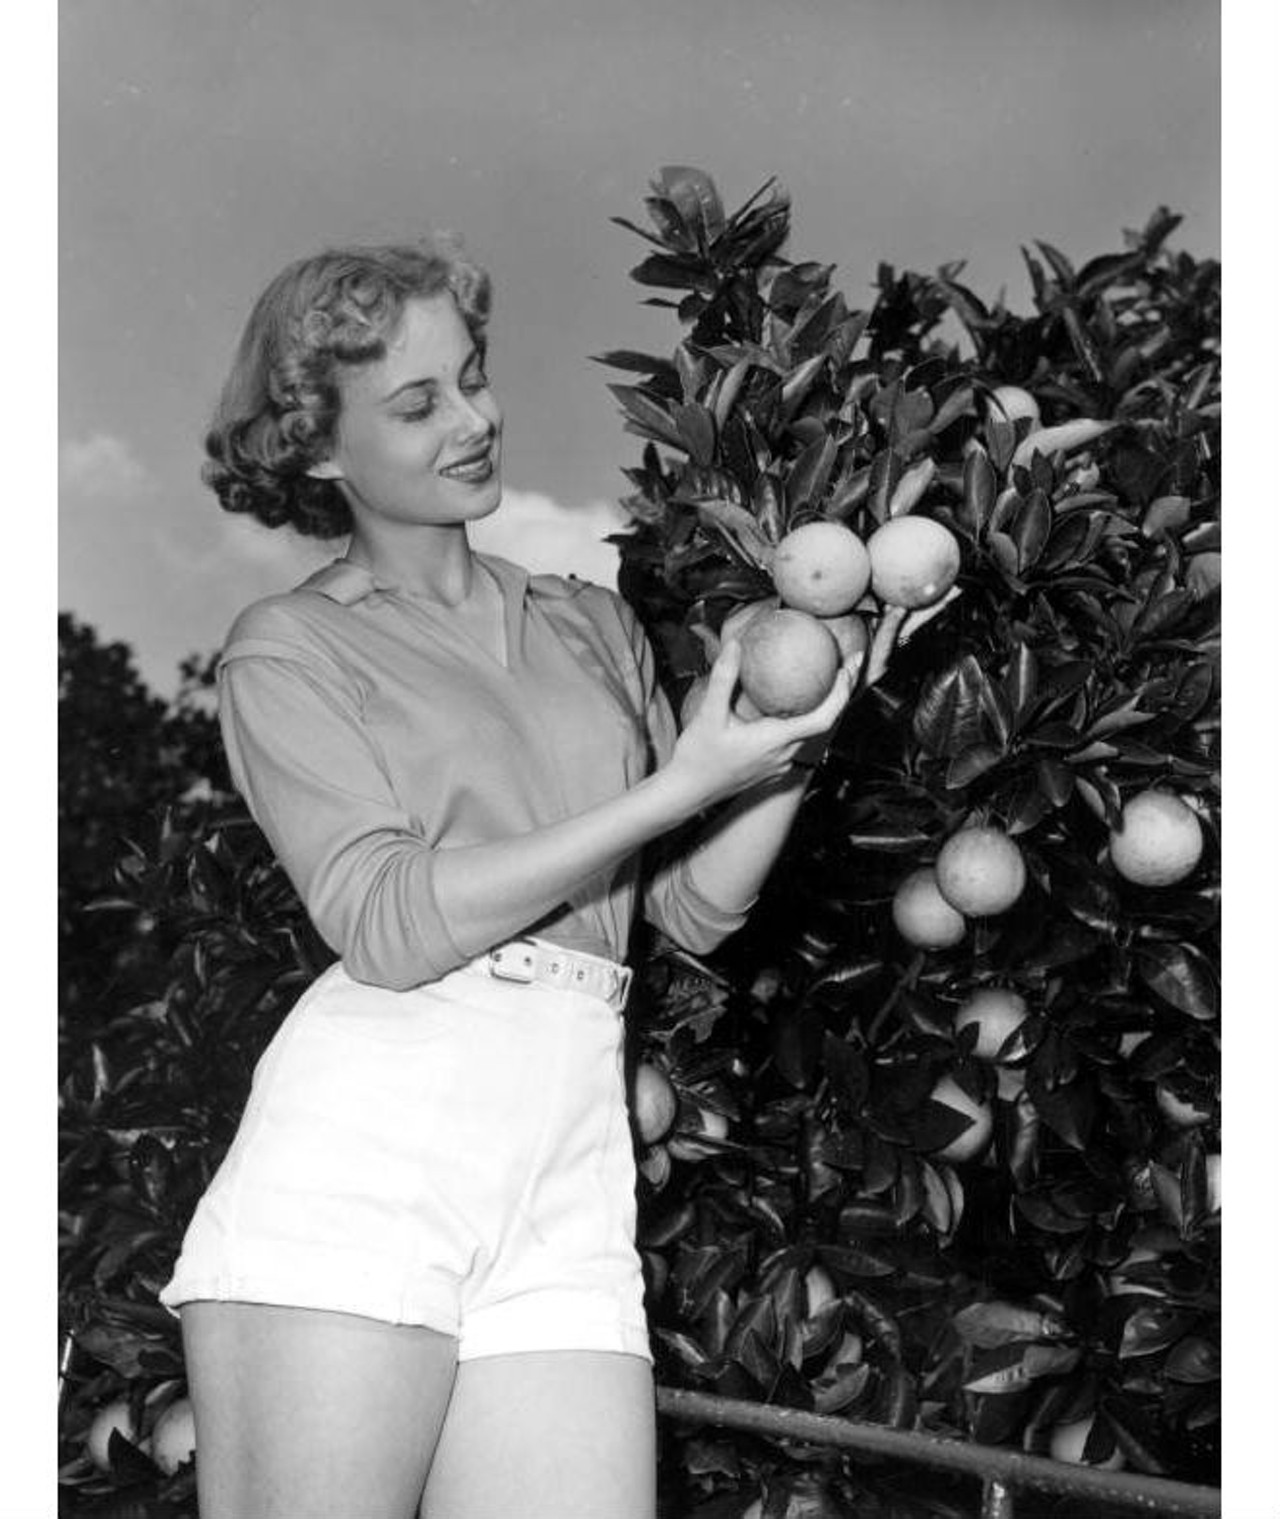 Kay Andrews picking oranges at contest in a grov